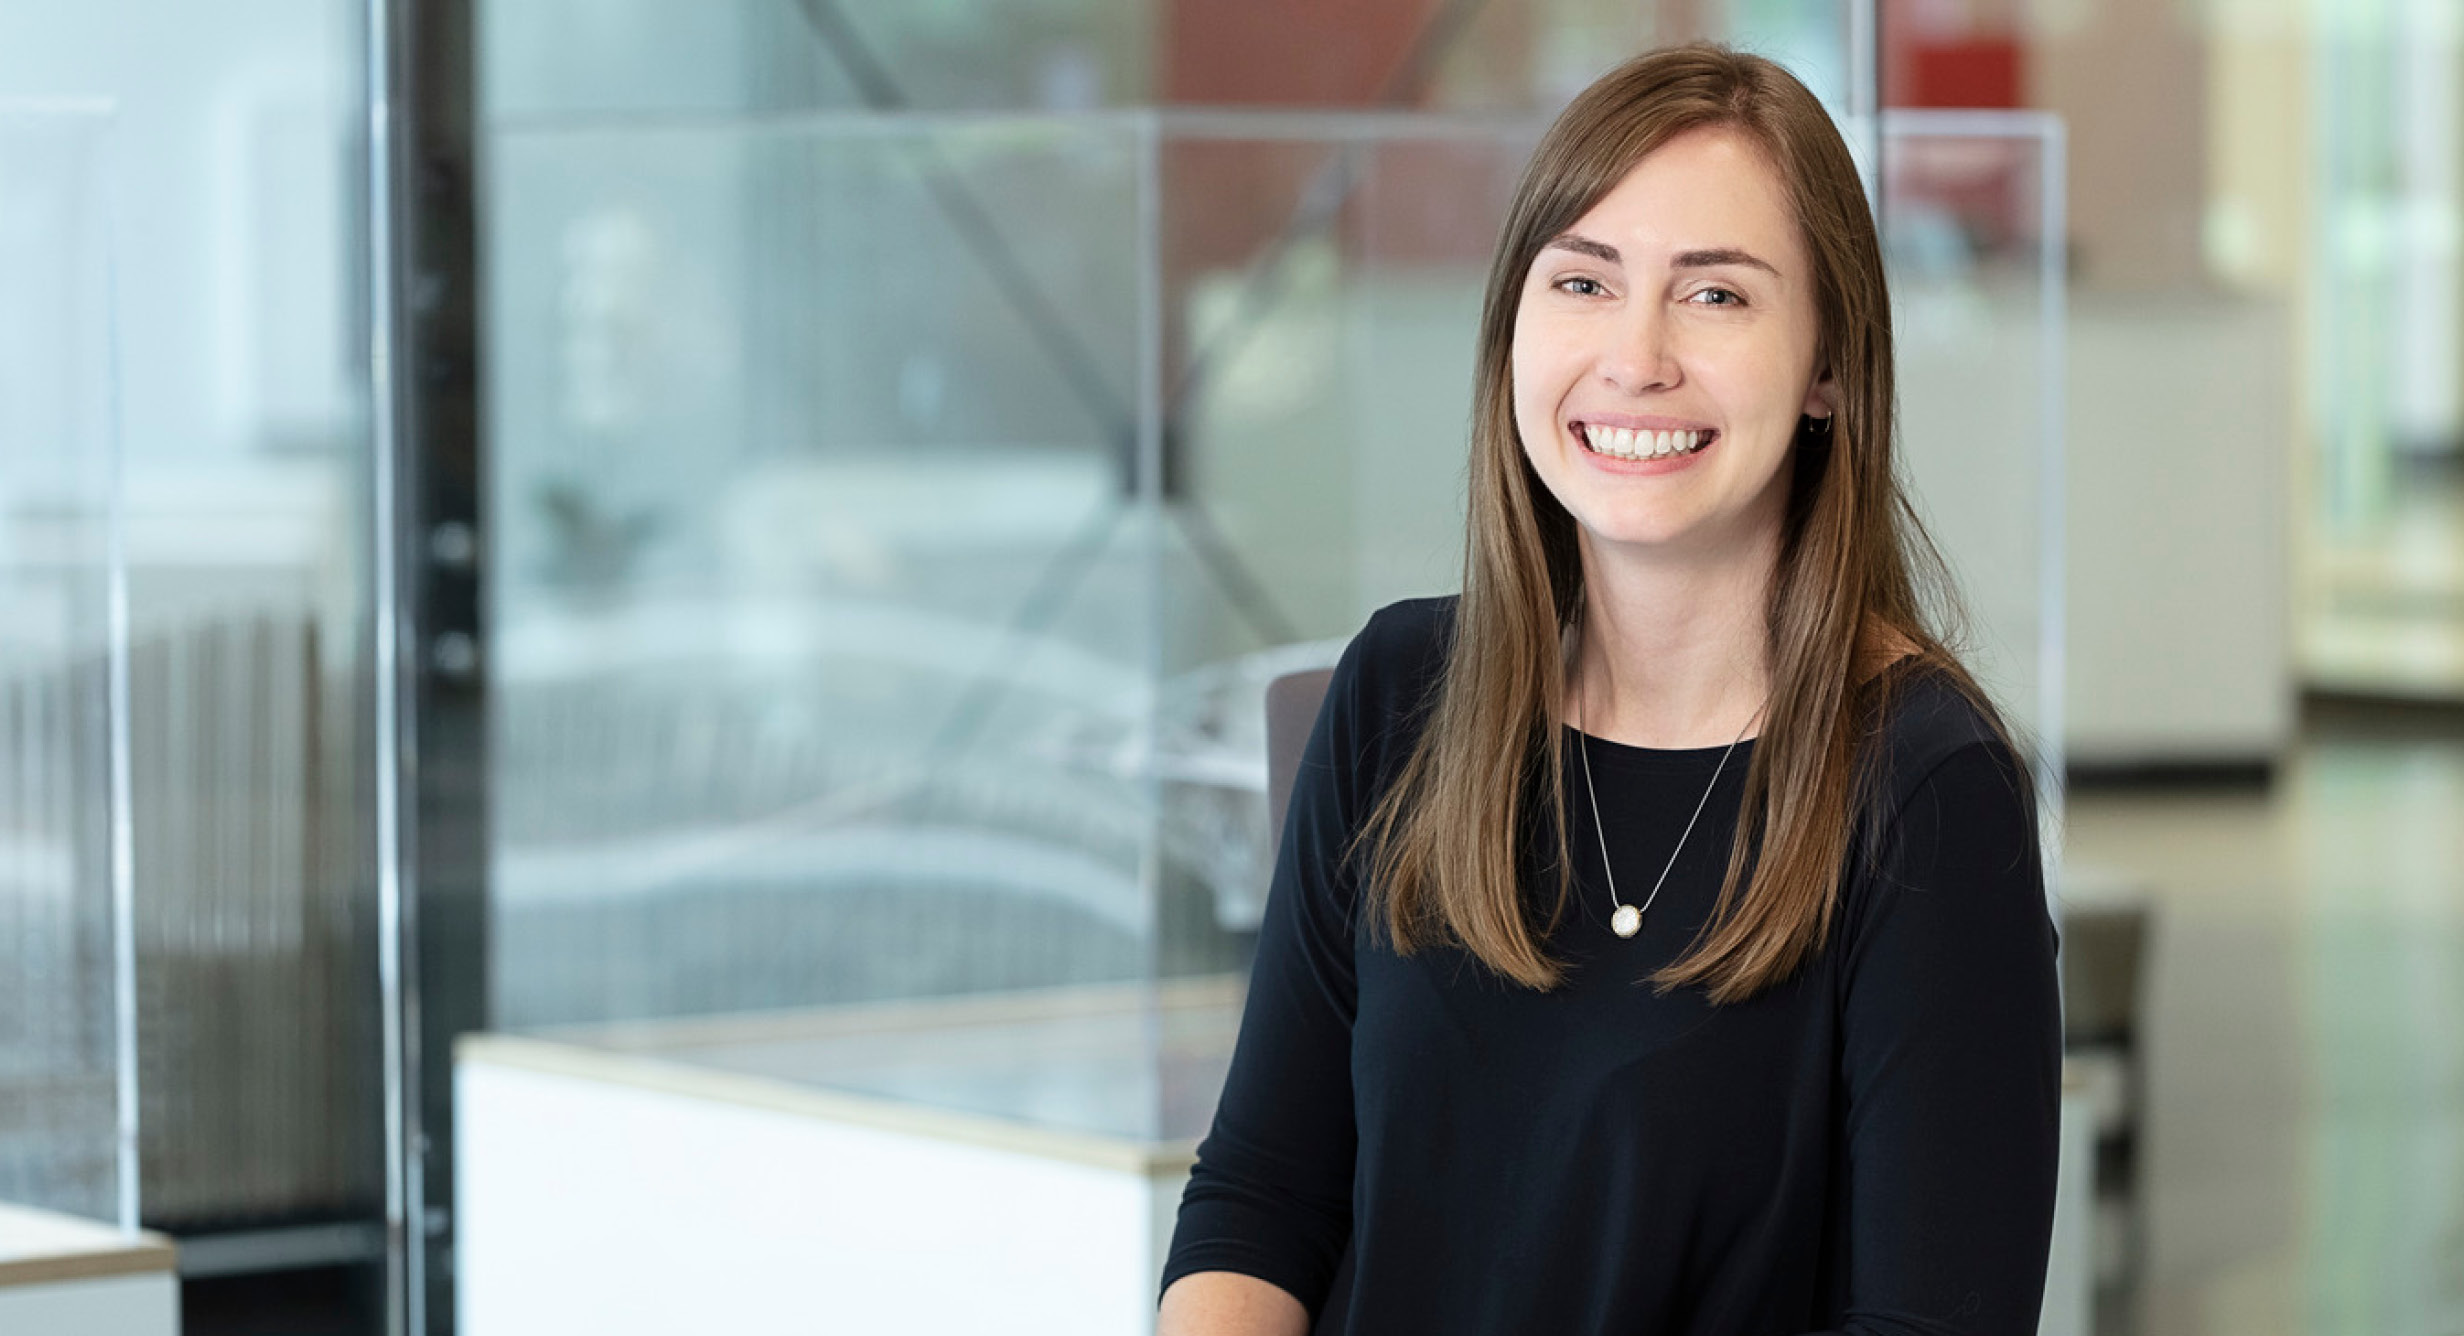 2019 HKS Health Fellow Will Research the Effect of Emergency Departments on Psychiatric Patients